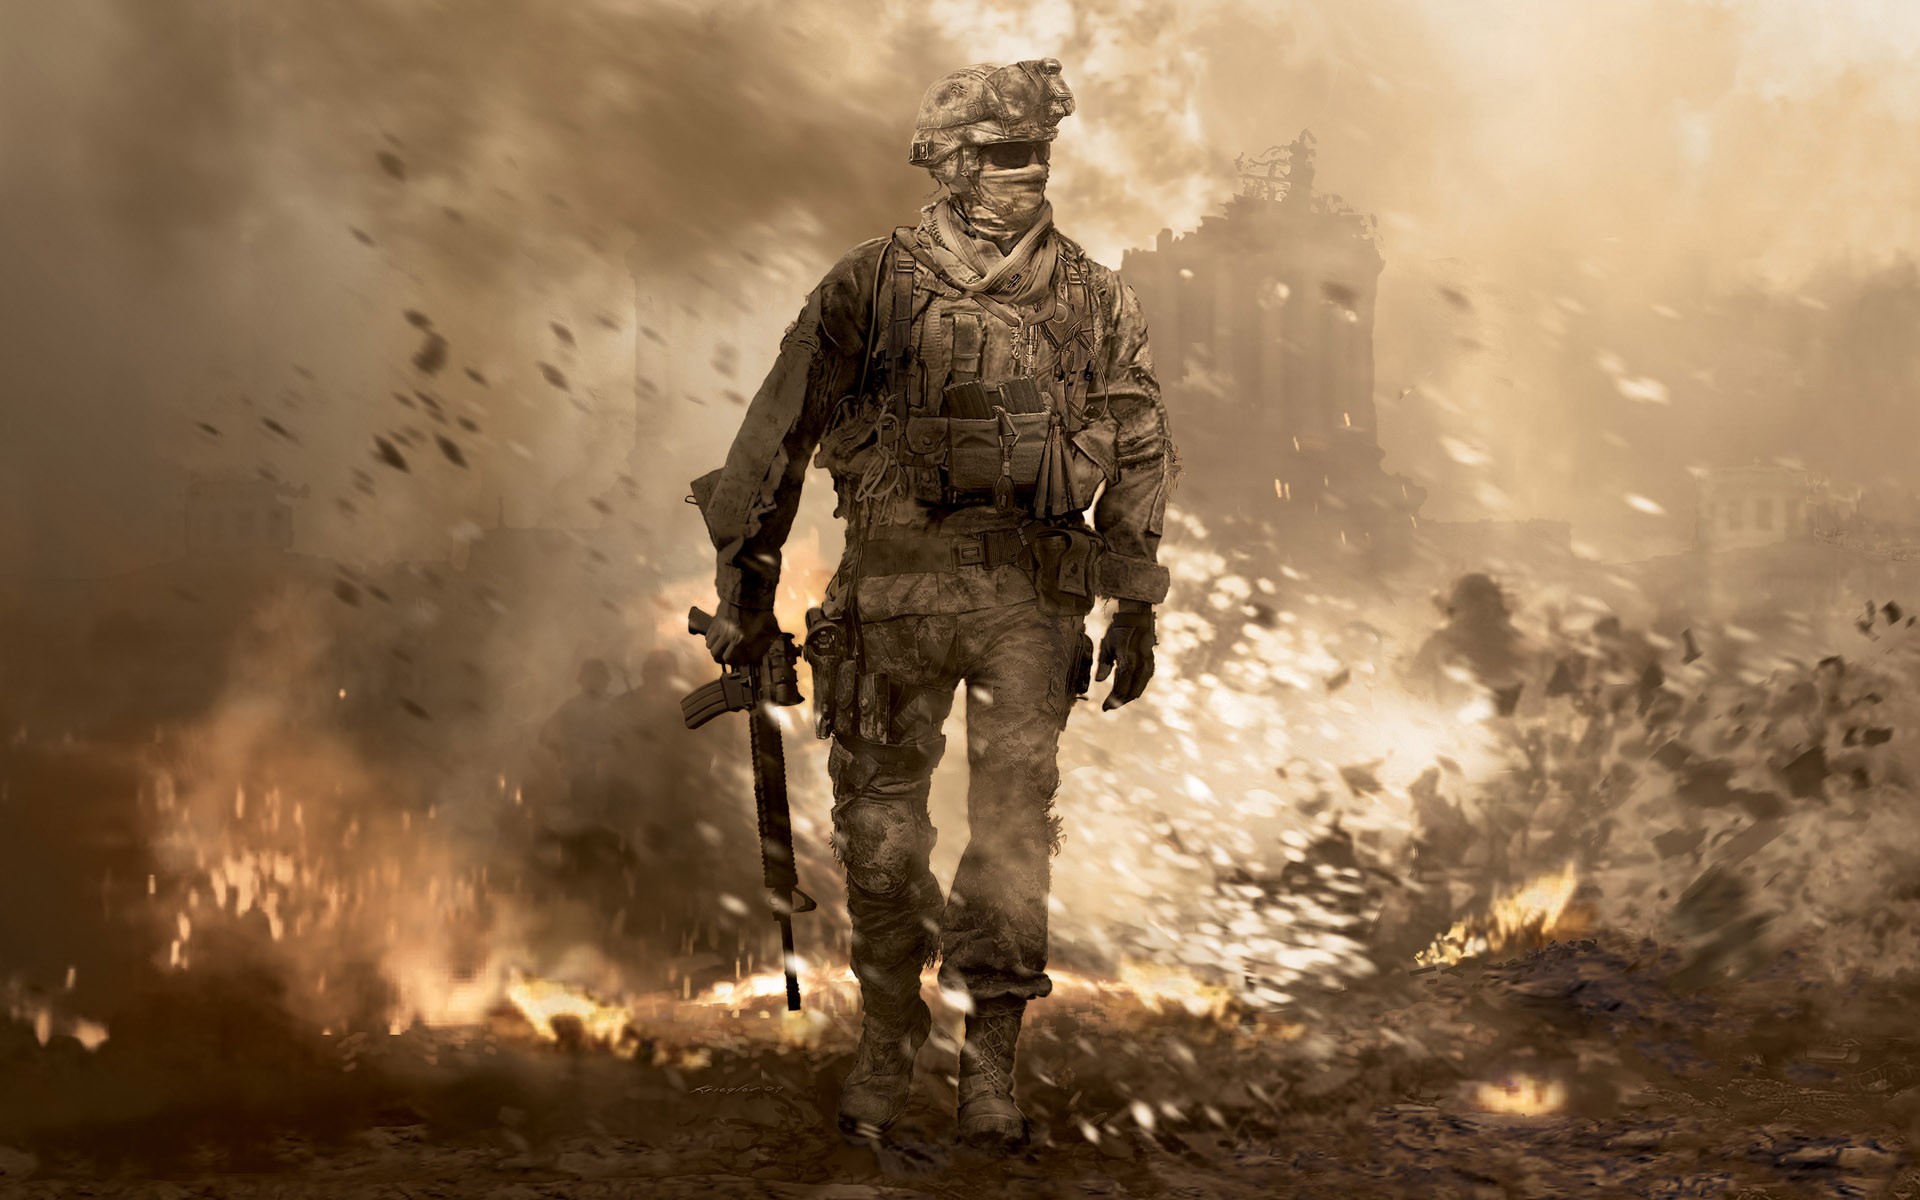 call of duty: modern warfare 2, call of duty, video game wallpaper for mobile